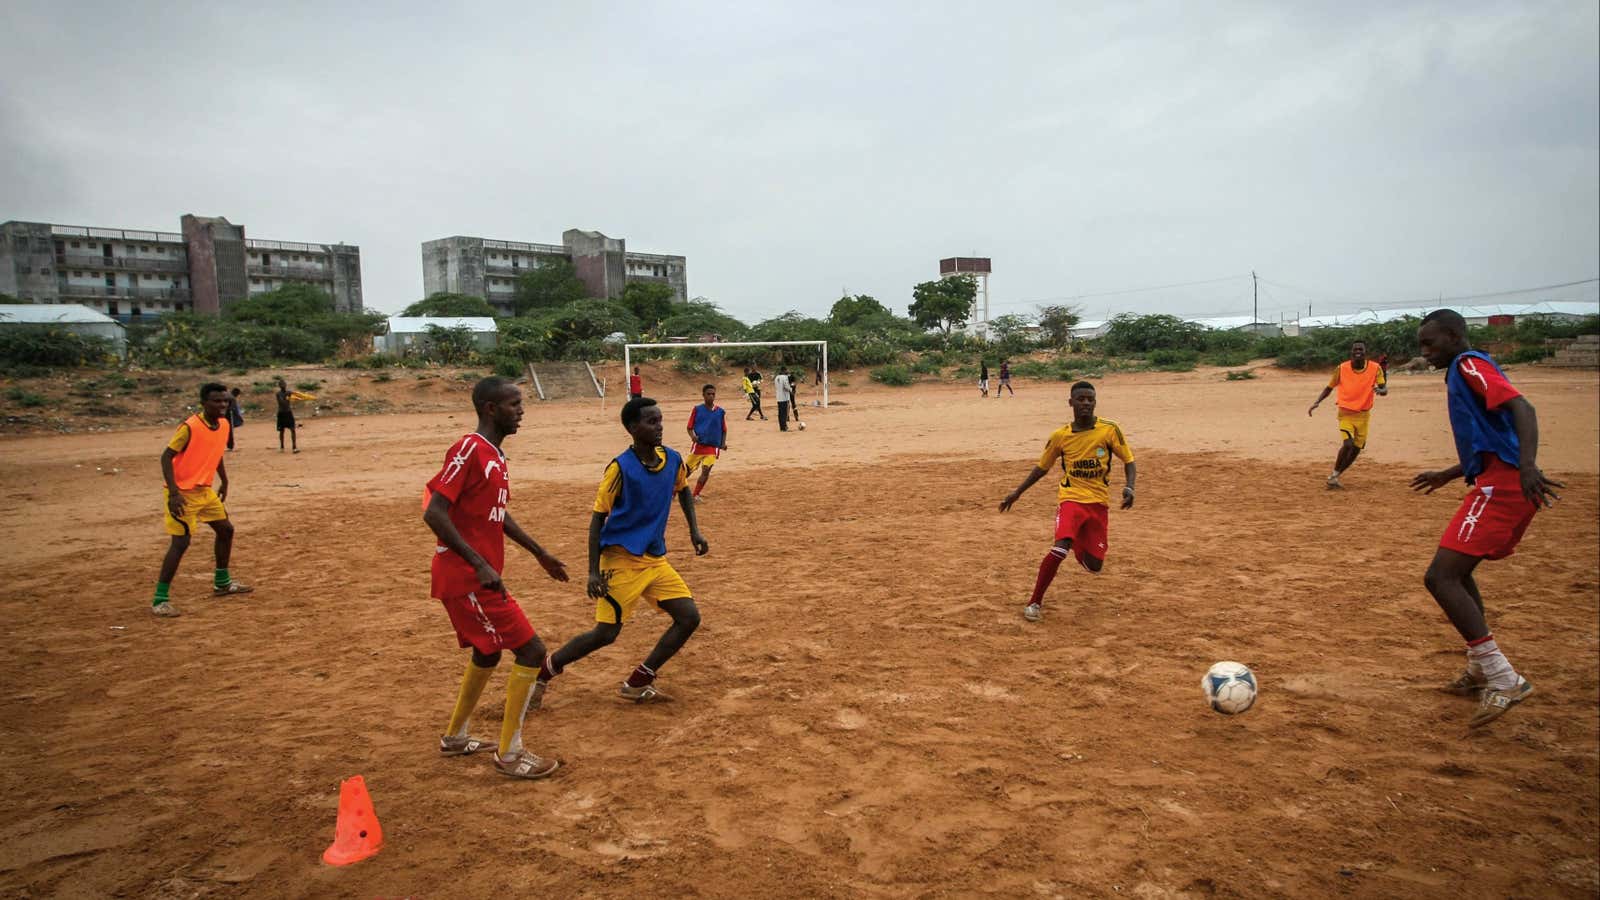 Increasing security in  Somalia has allowed football to come back strong.